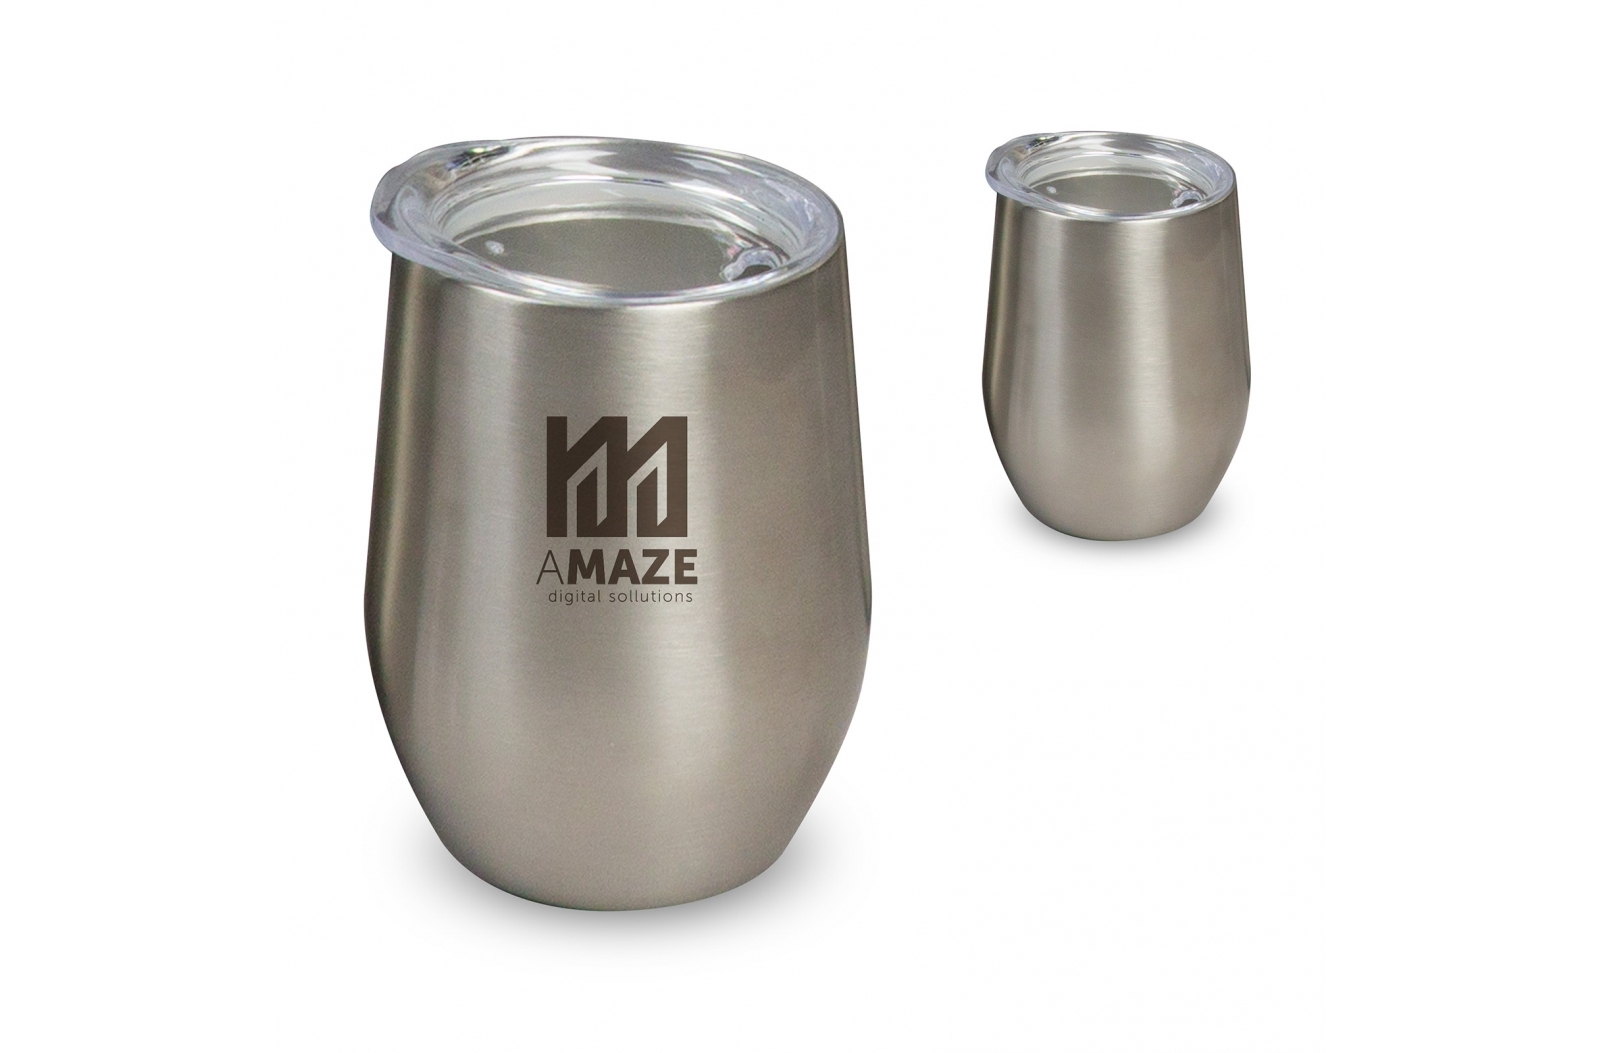 Double-Walled Stainless Steel Mug with Lid - Teignmouth